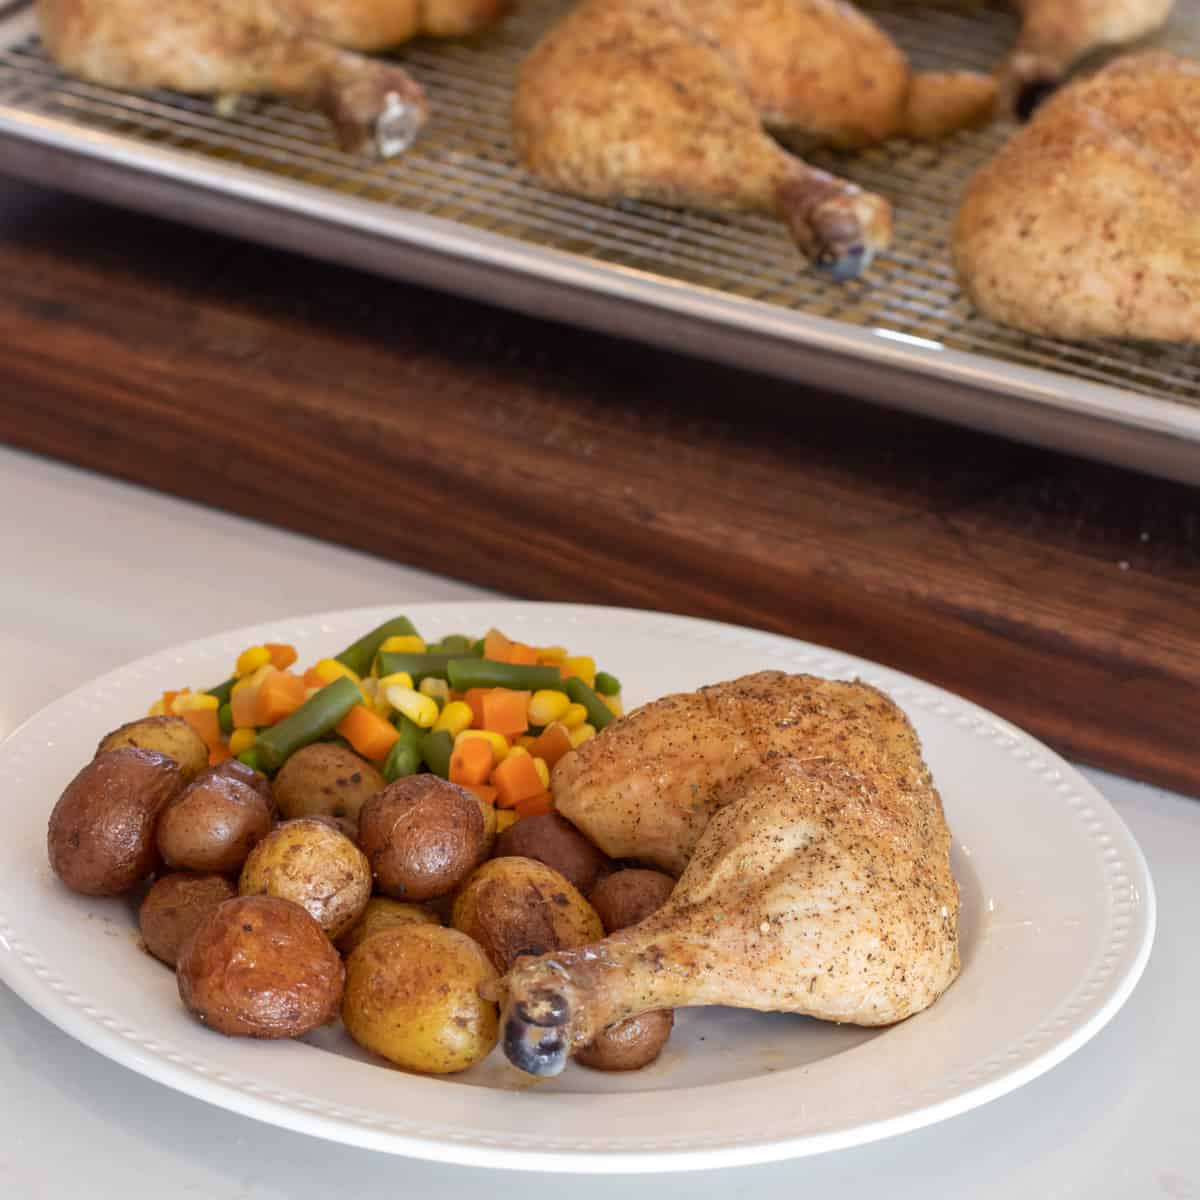 A round white plate with cooked chicken, potatoes and vegetables.